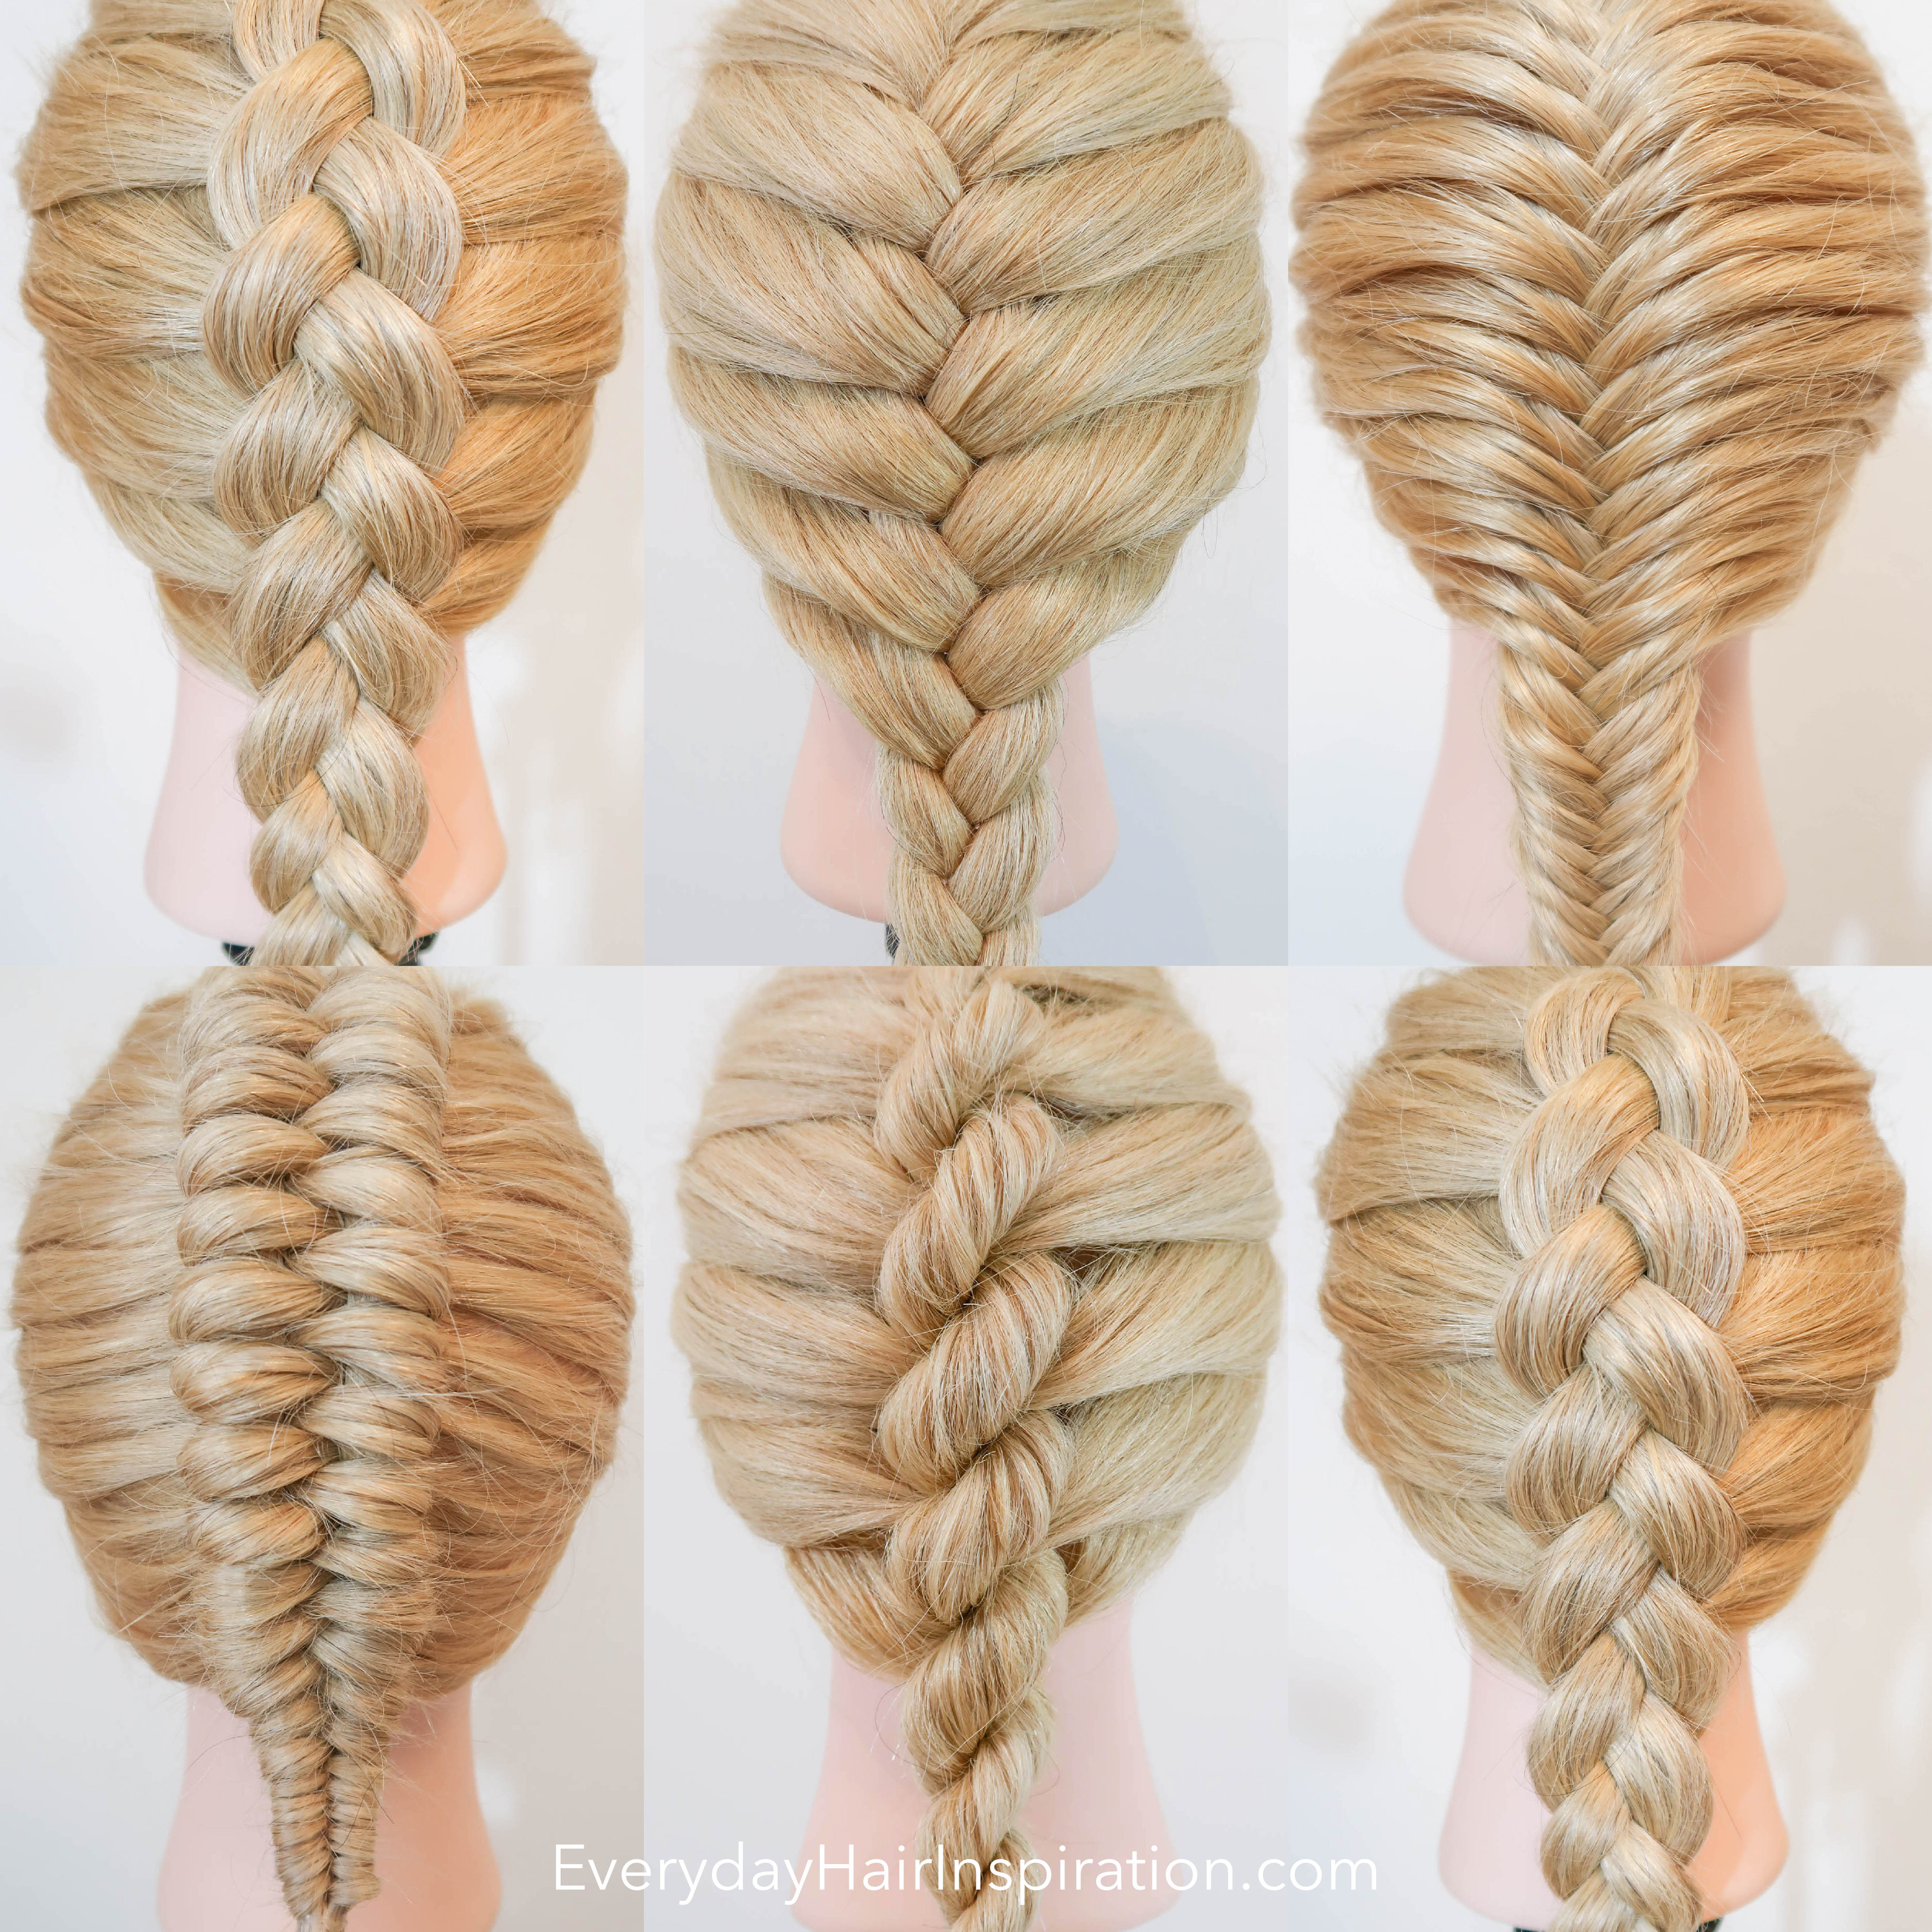 Woven Knot Braid Hairstyle